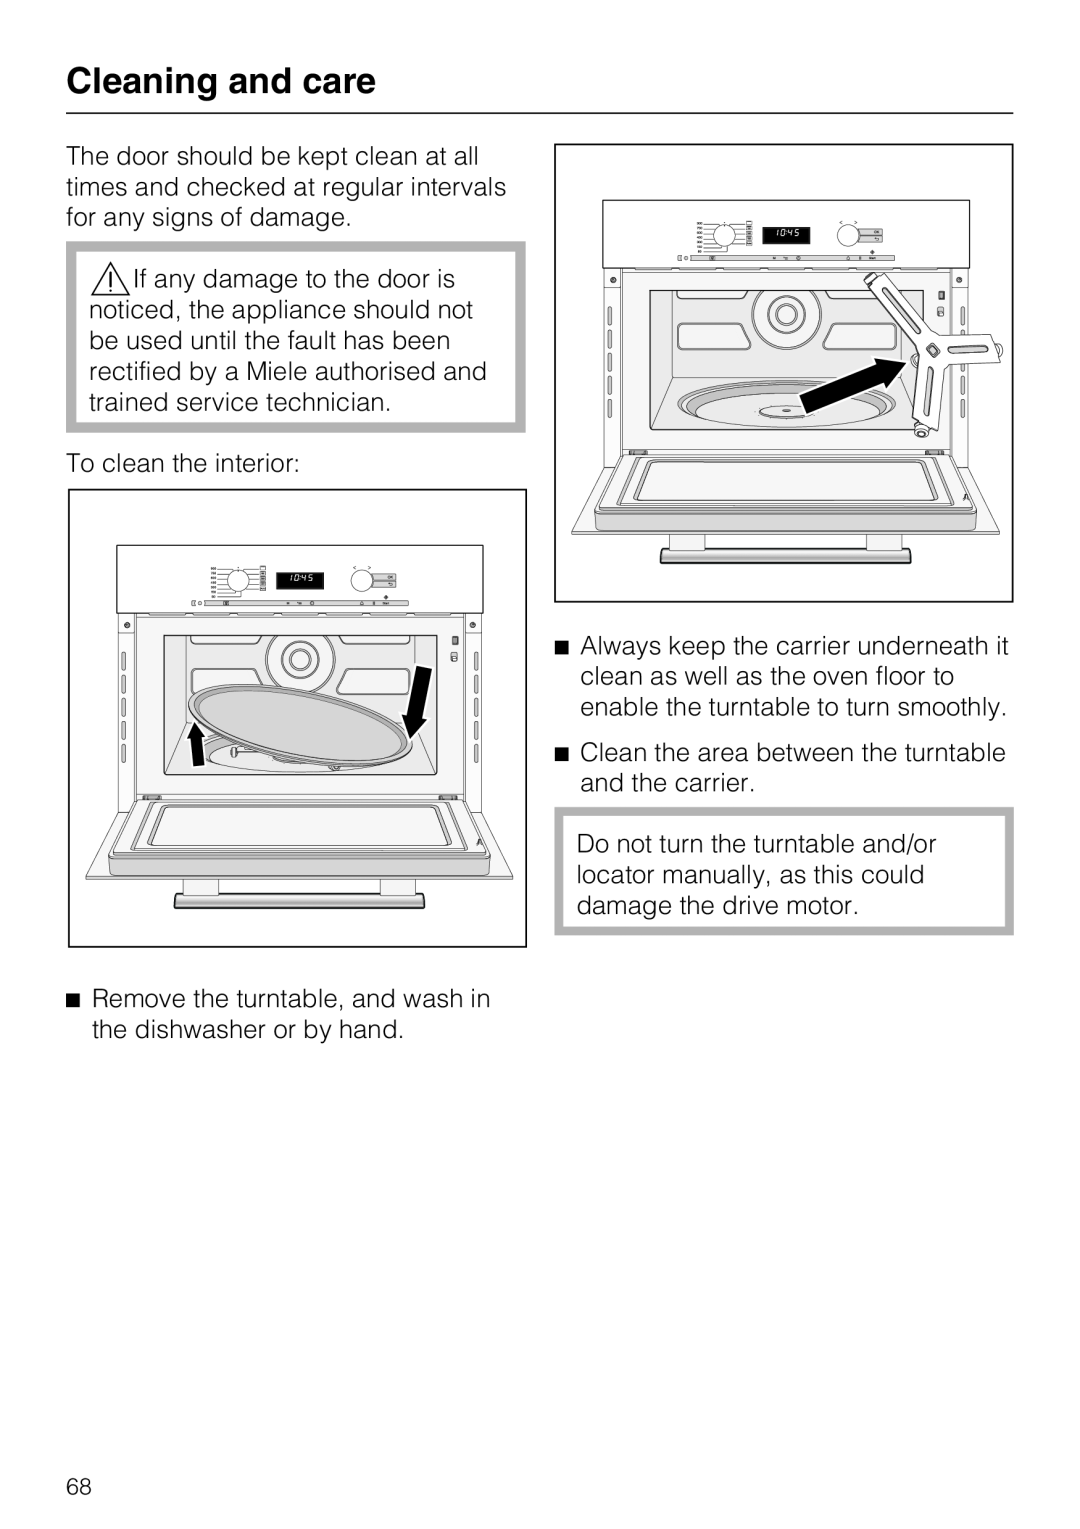 Miele 09 919 100 operating instructions Cleaning and care, To clean the interior 